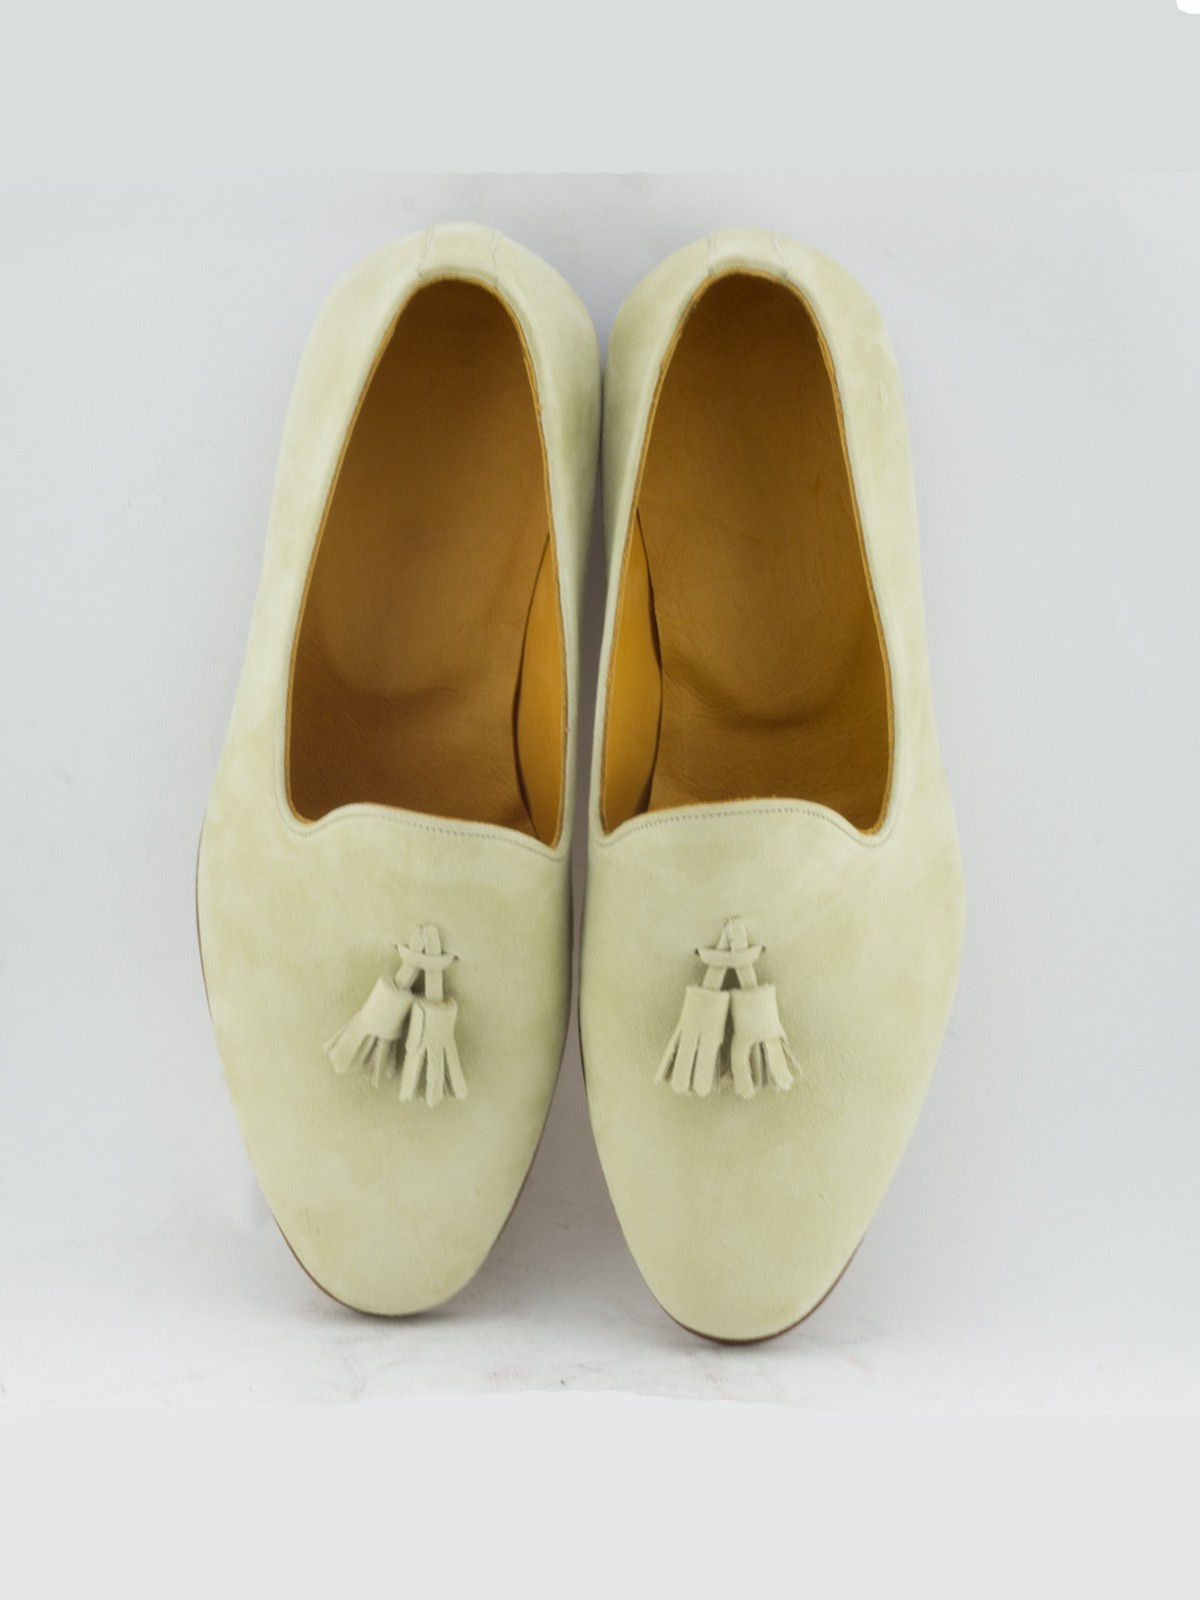 Buy Stone Genuine Suede Leather Tassel Loafers by GentWith.com